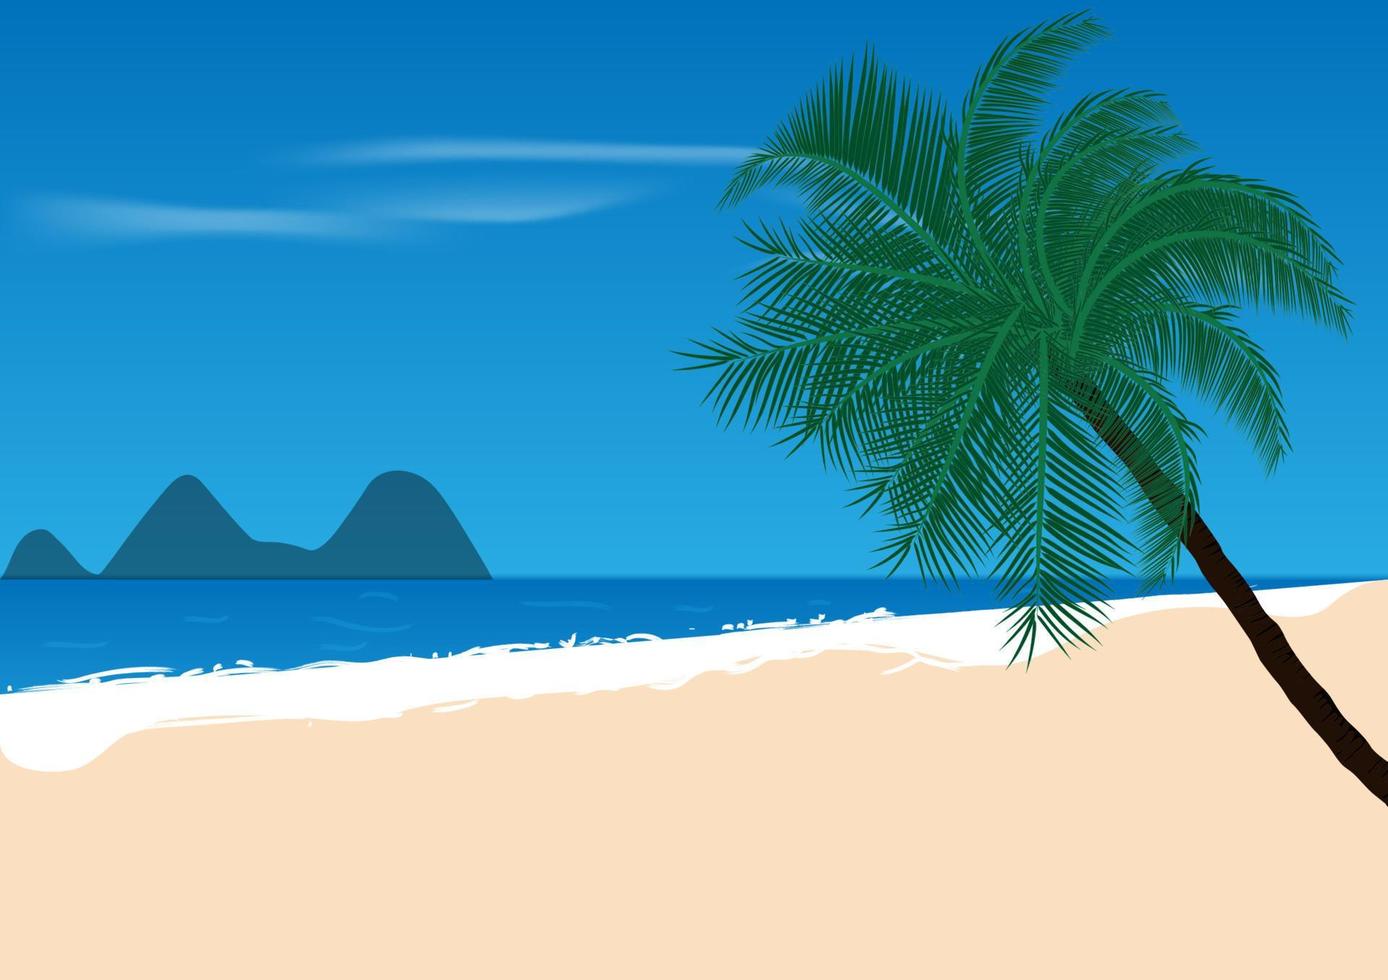 graphics drawing landscape ocean and sand beach with coconut tree vector illustration